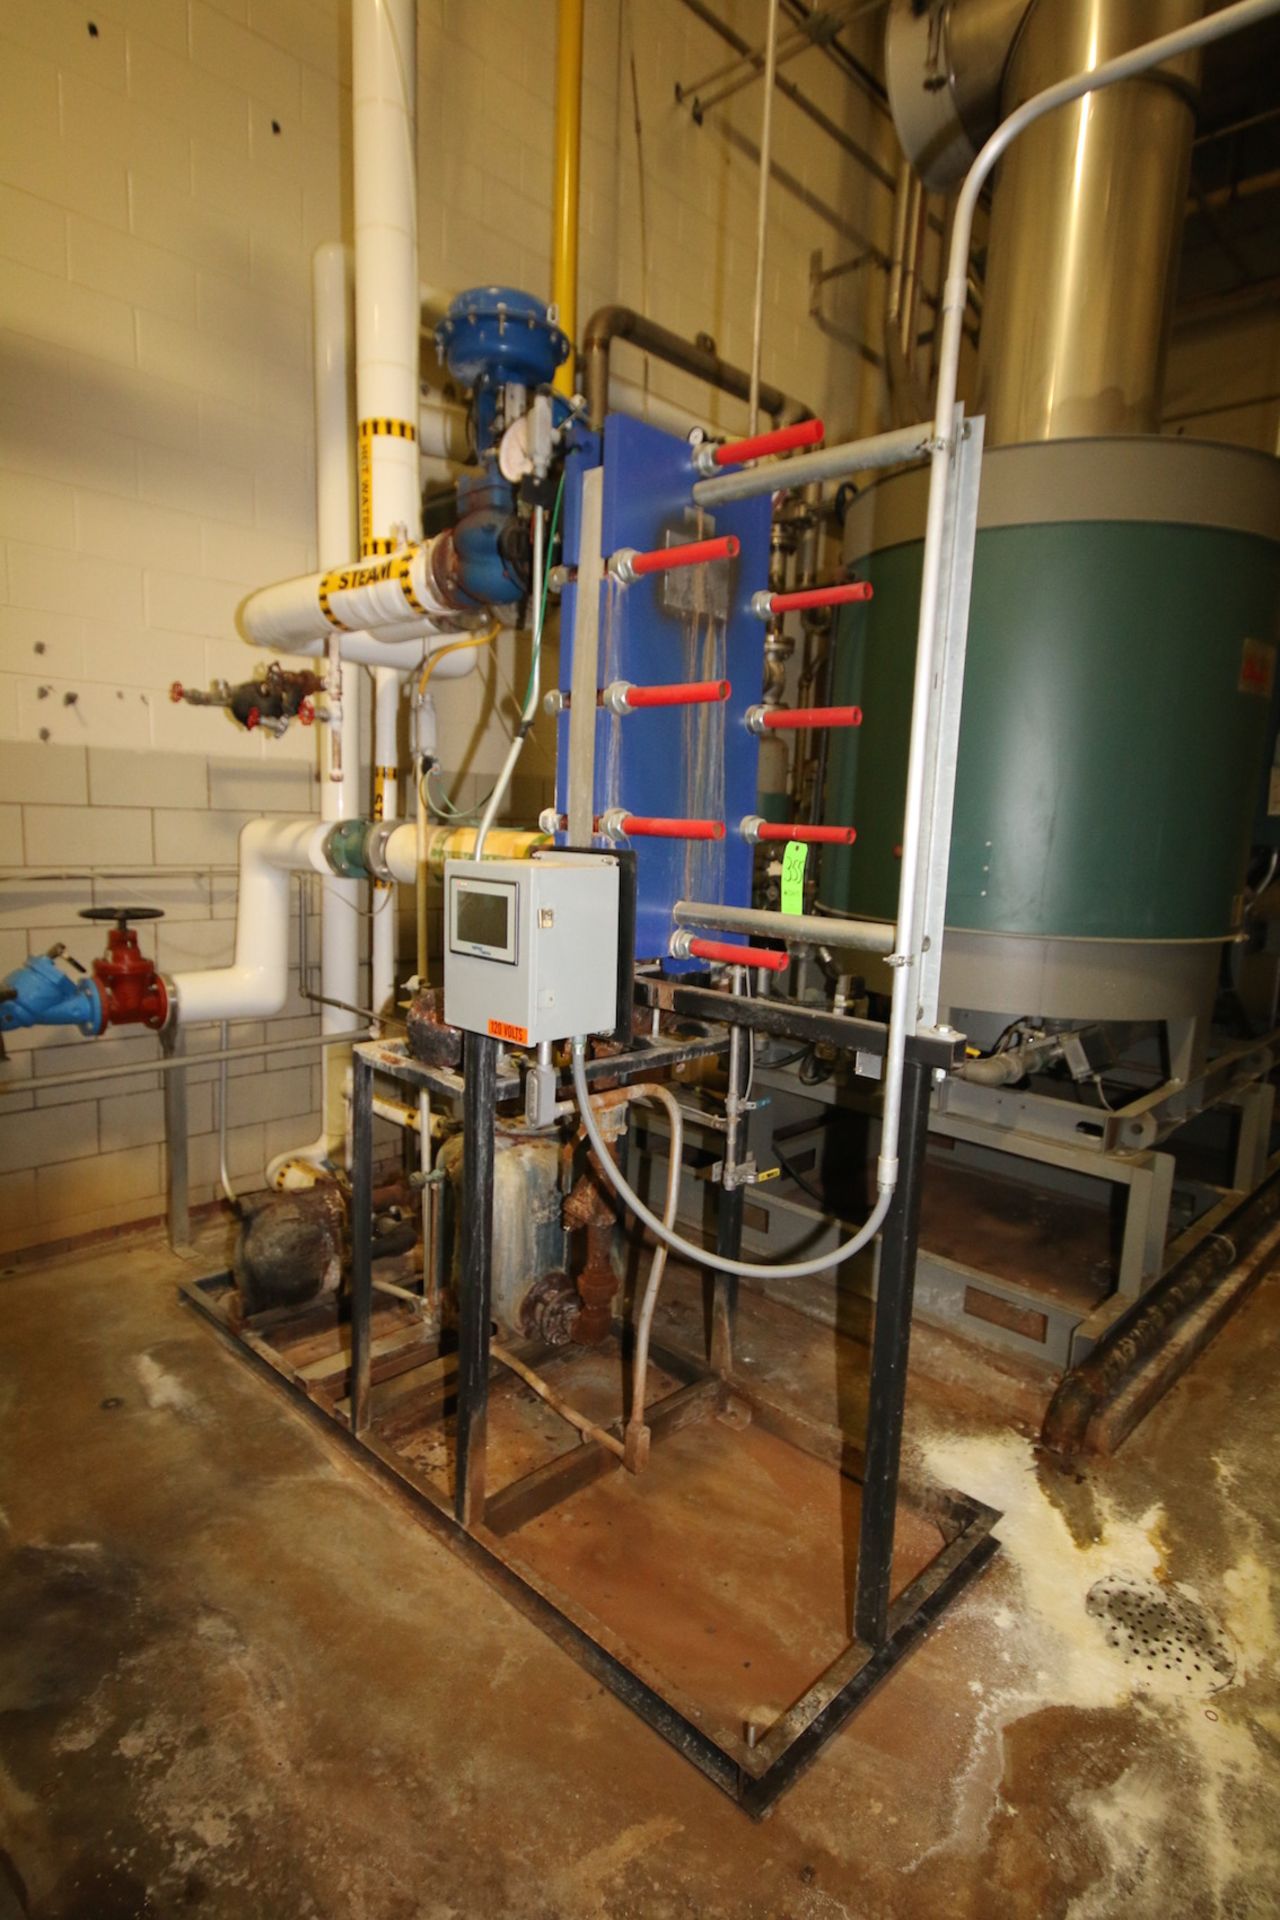 2011 Hot Water Circulation System with Alfa Laval Plate Frame -Tigerflow Skid Mounted Boiler Feed - Image 2 of 6